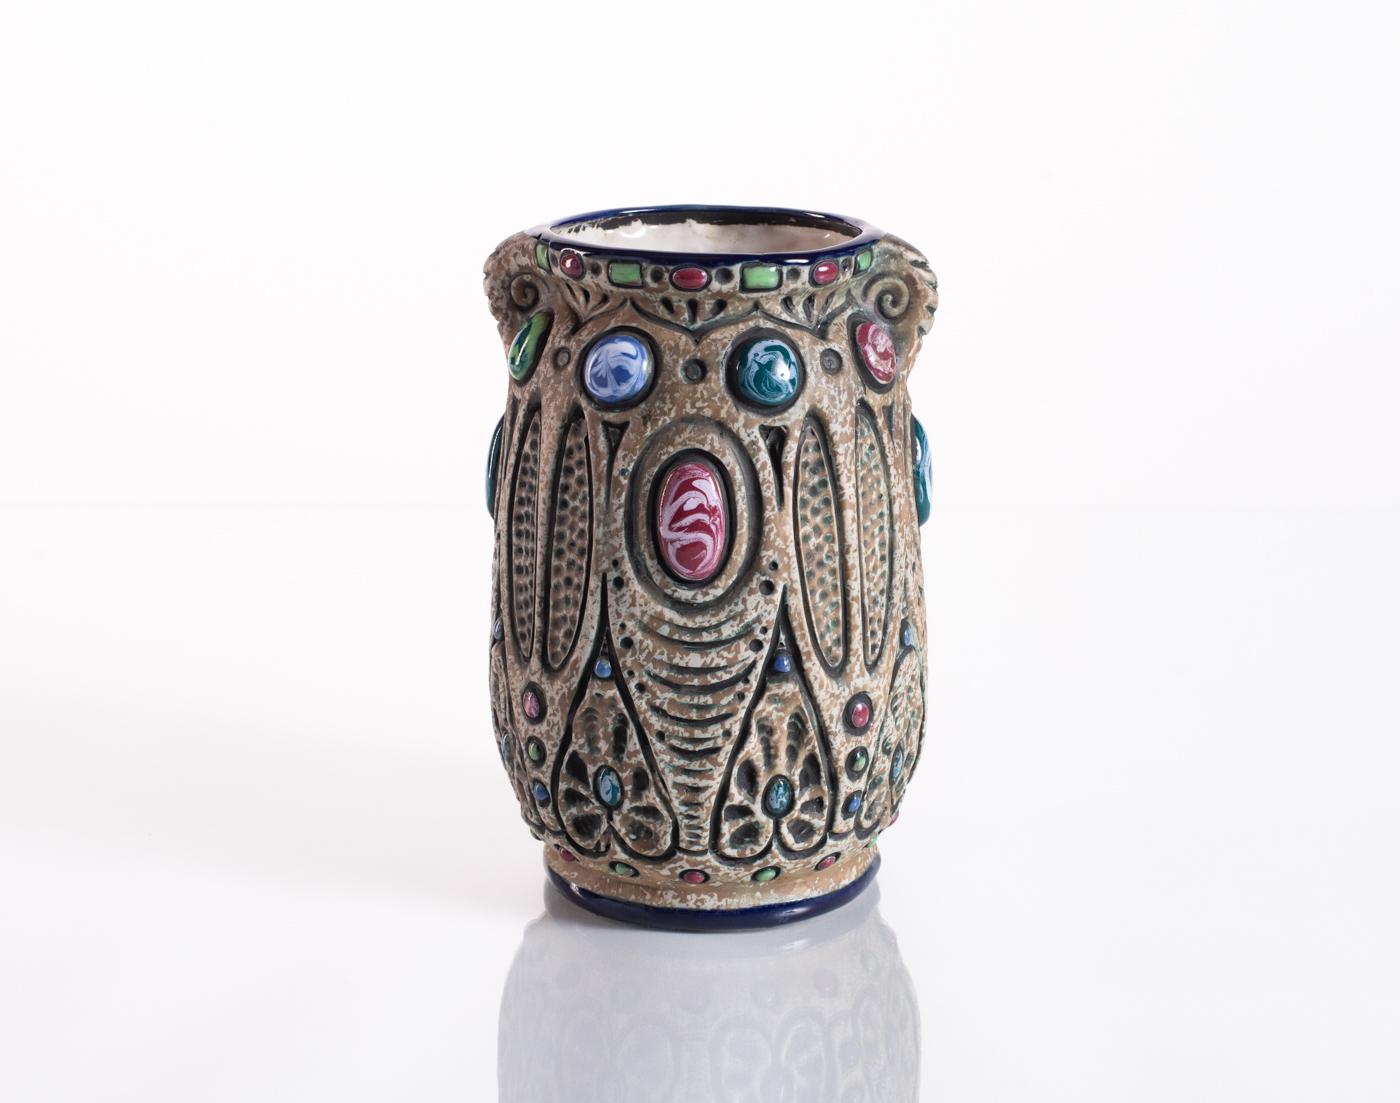 Carved folk art vase, with hand-painted bright cloisonné enamel embellishments. The form's contrasting glazes amplify its intricate carvings and mottled texture. Stamped Amphora in the base, and numbered.

Riessner, Stellmacher and Kessel (RStK),